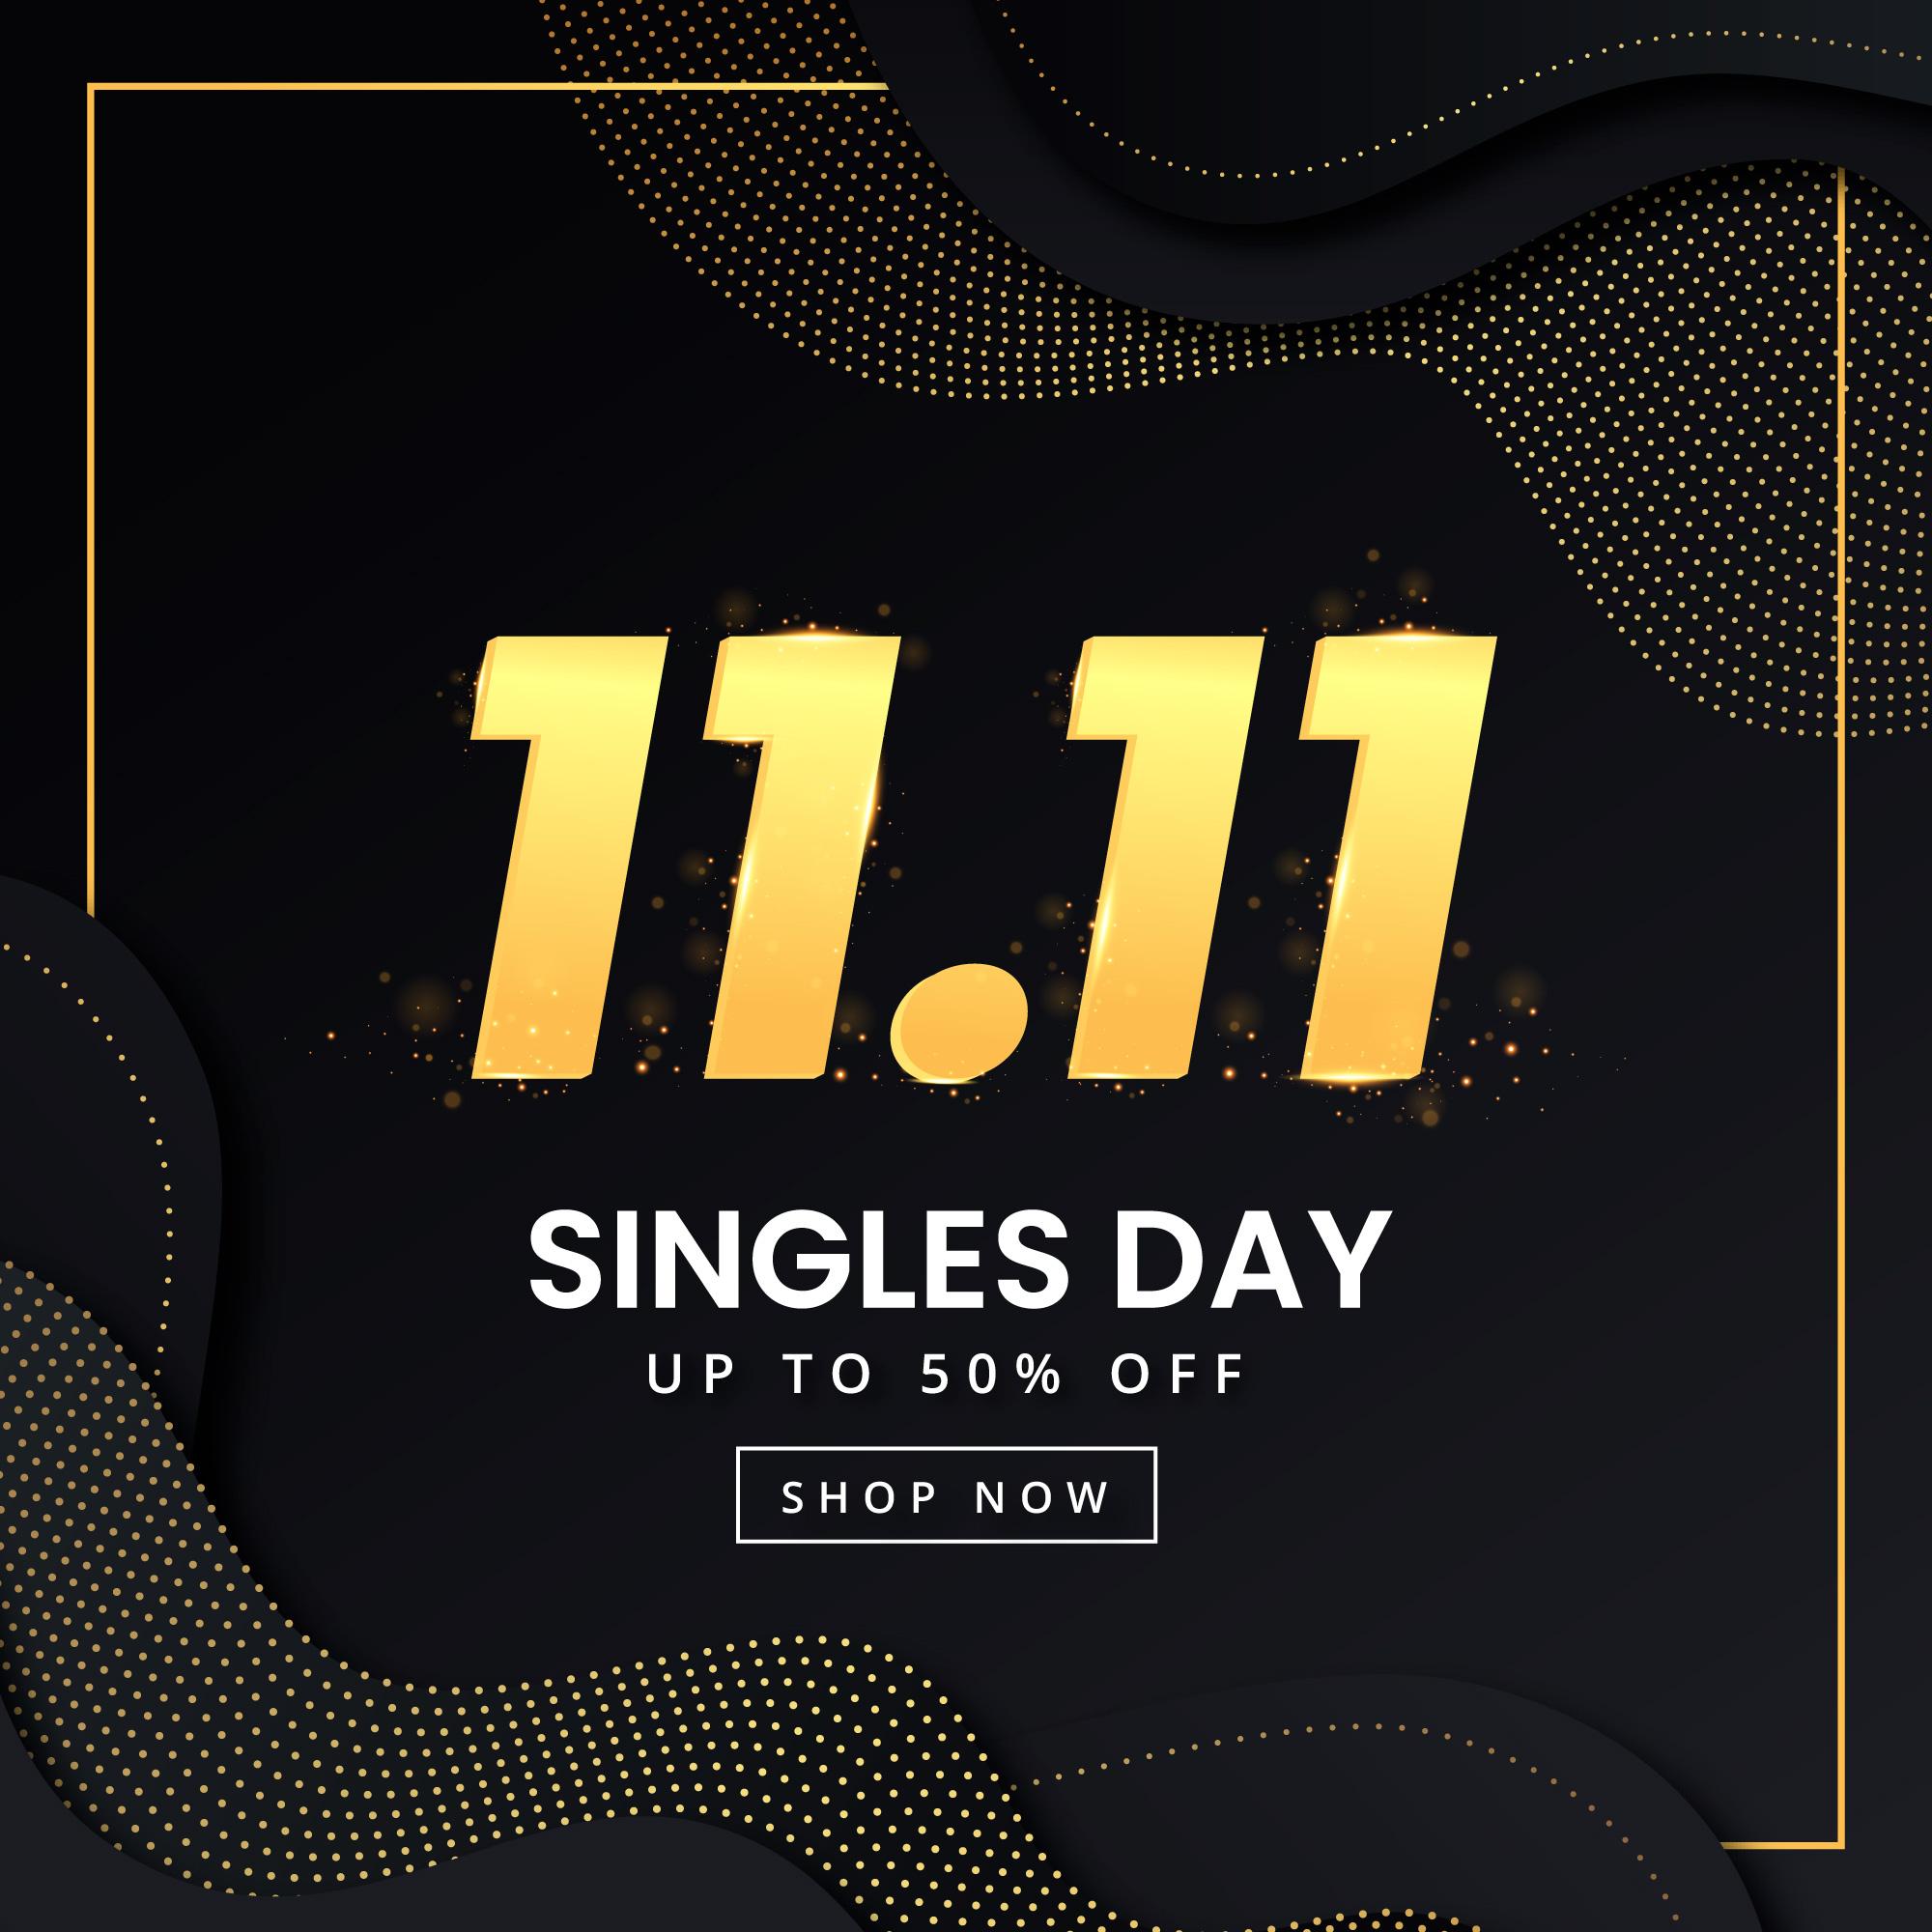 Black and Golden Singles Day Free Vector cover image.